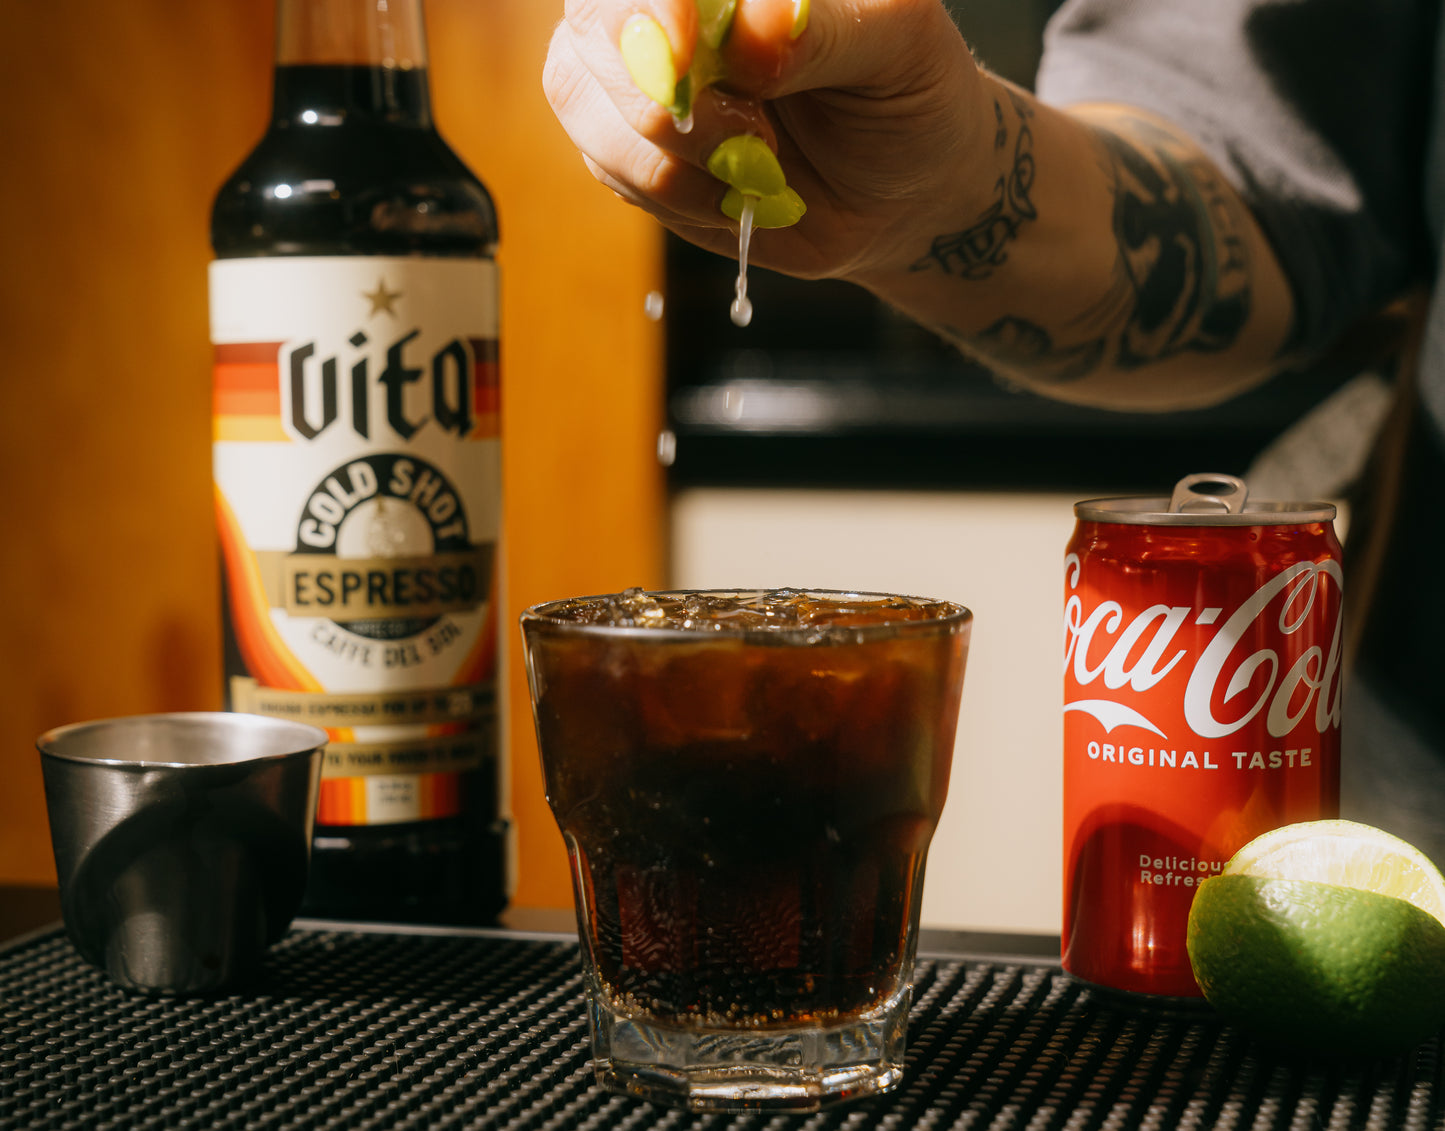 Cold Shot bottle with hand squeezing lime wedge over Cold Shot Coke in glass with cola can and lime.